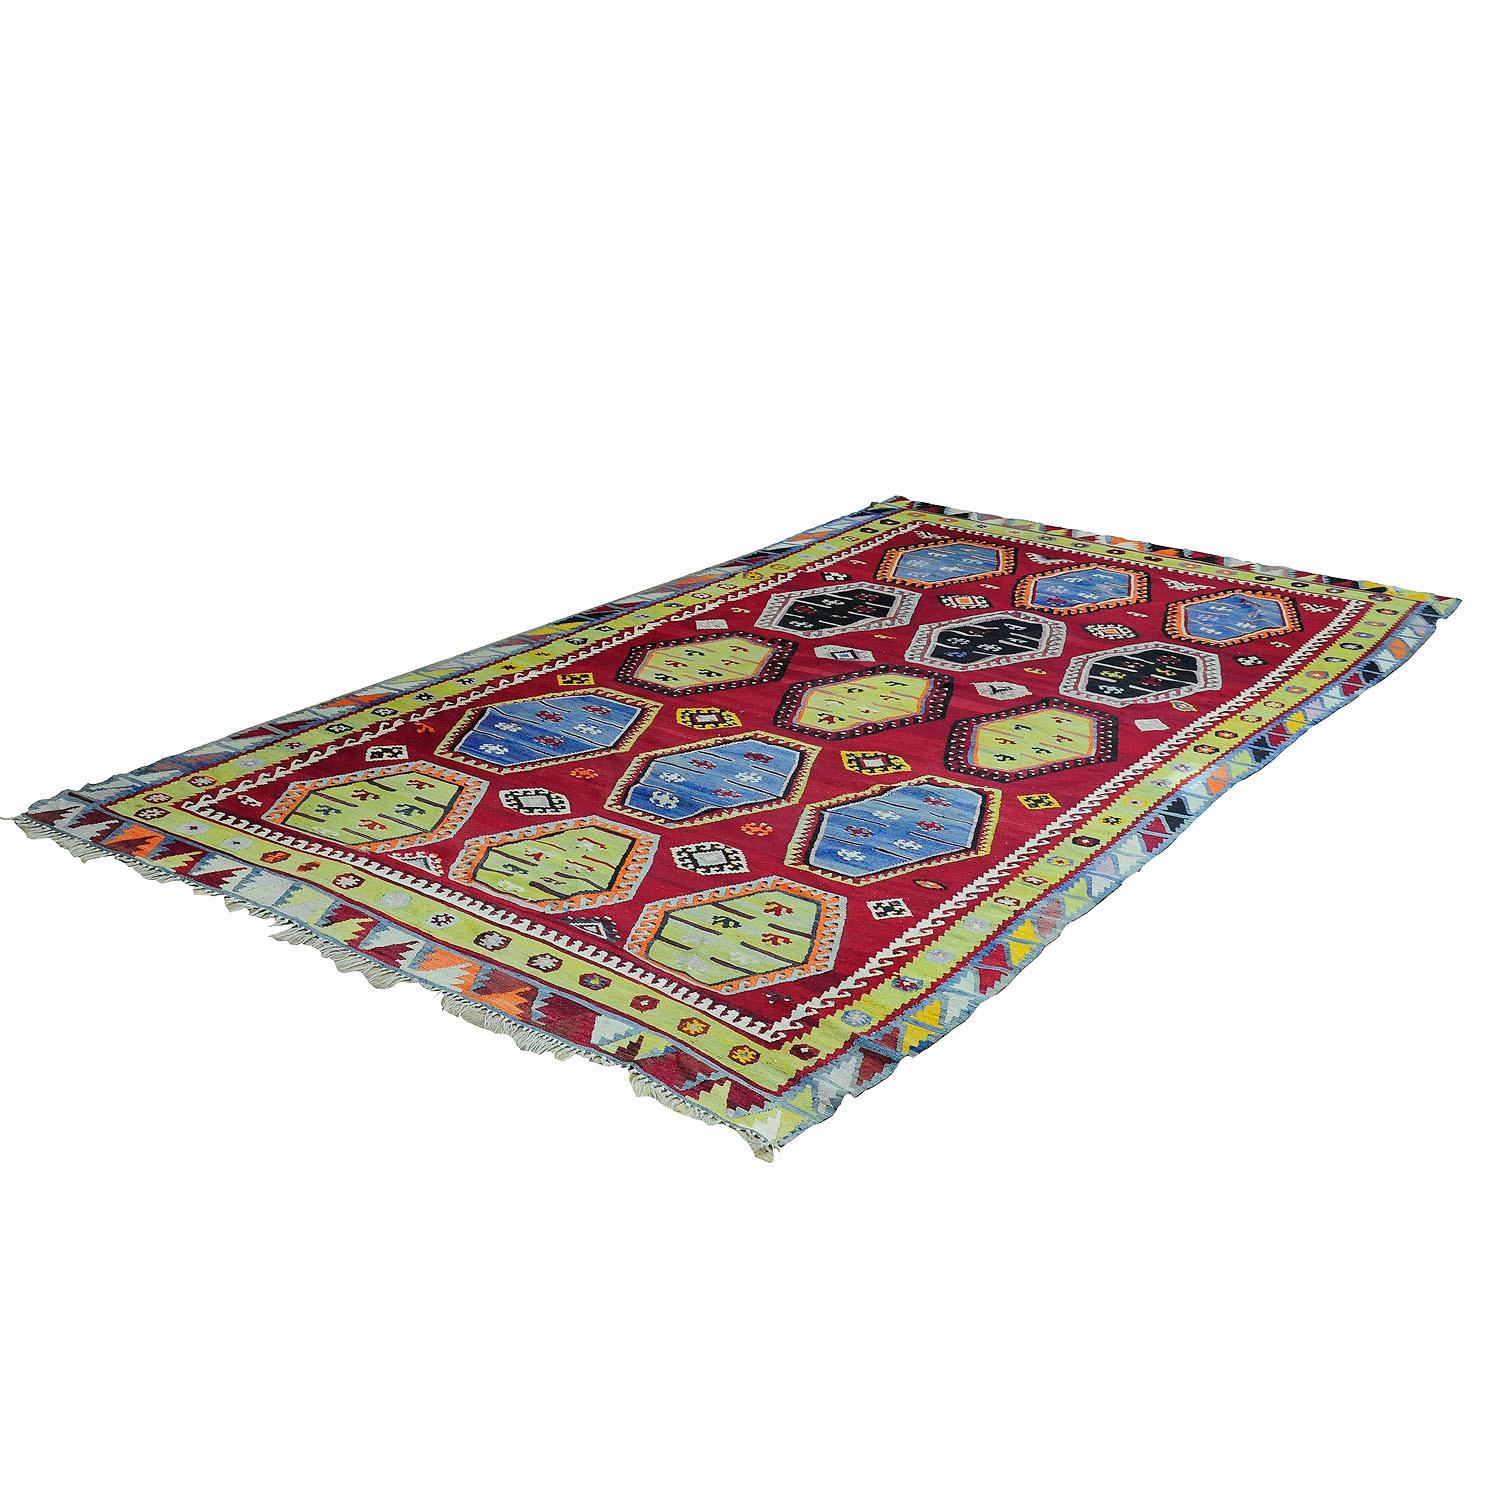 Antique Colorful Turkish Sarkisla Kilim Rug ca. 1930

An antique Sarkisla Kilim rug hand-woven ca. in 1930 's. A great colorful authentic rug in very good condition. Sarkisla is a small town in the Anatolian Sivas province of Turkey.

artfour is an